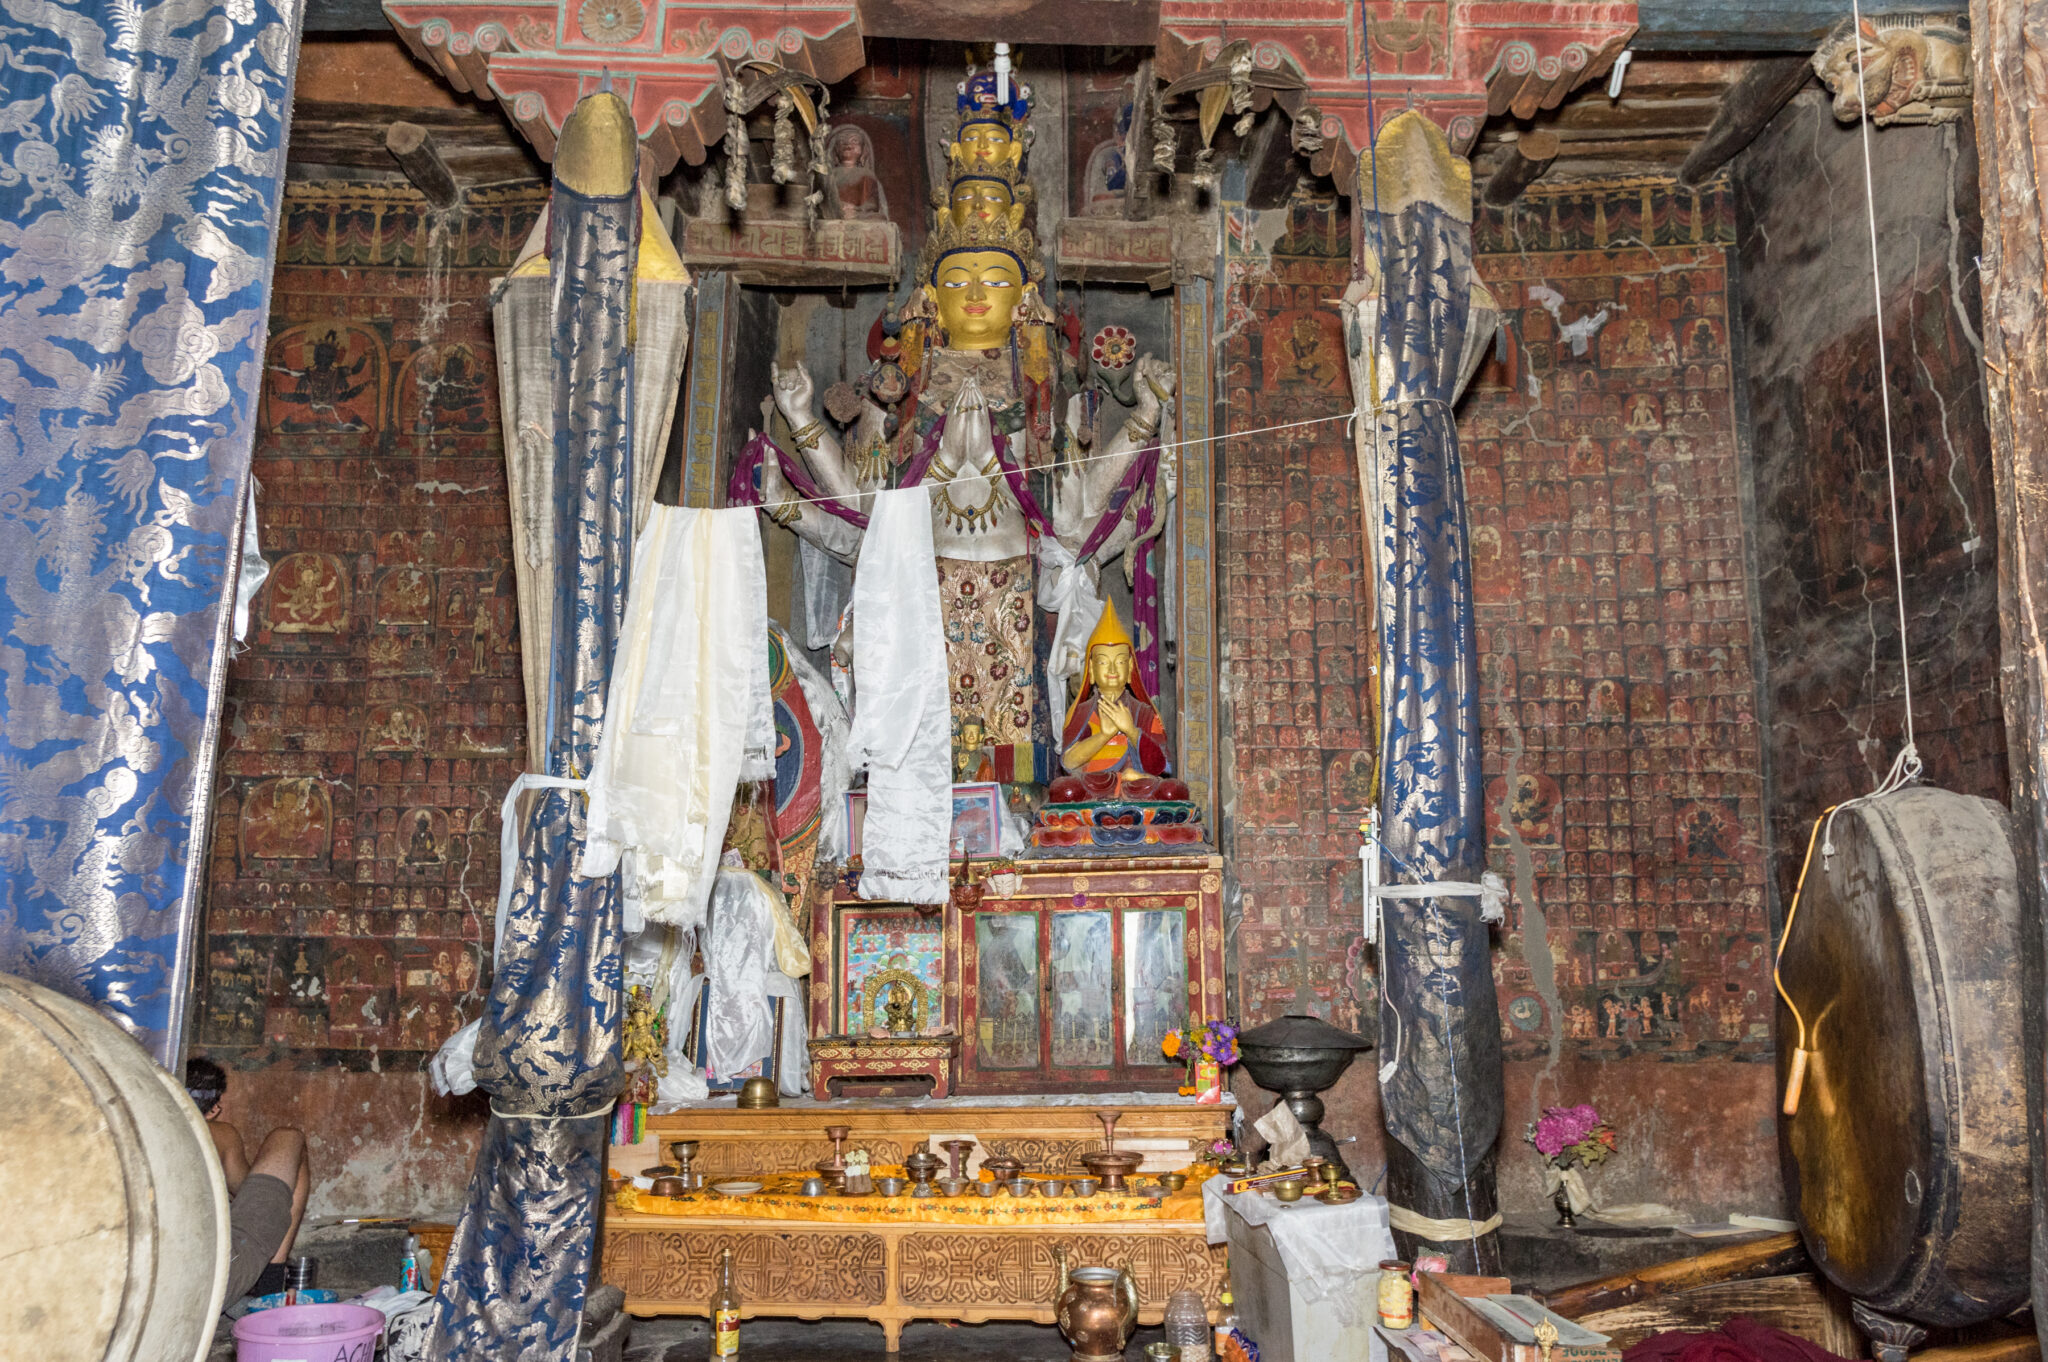 View through columns and textiles of densely muraled wall featuring niche containing tall Bodhisattva statue